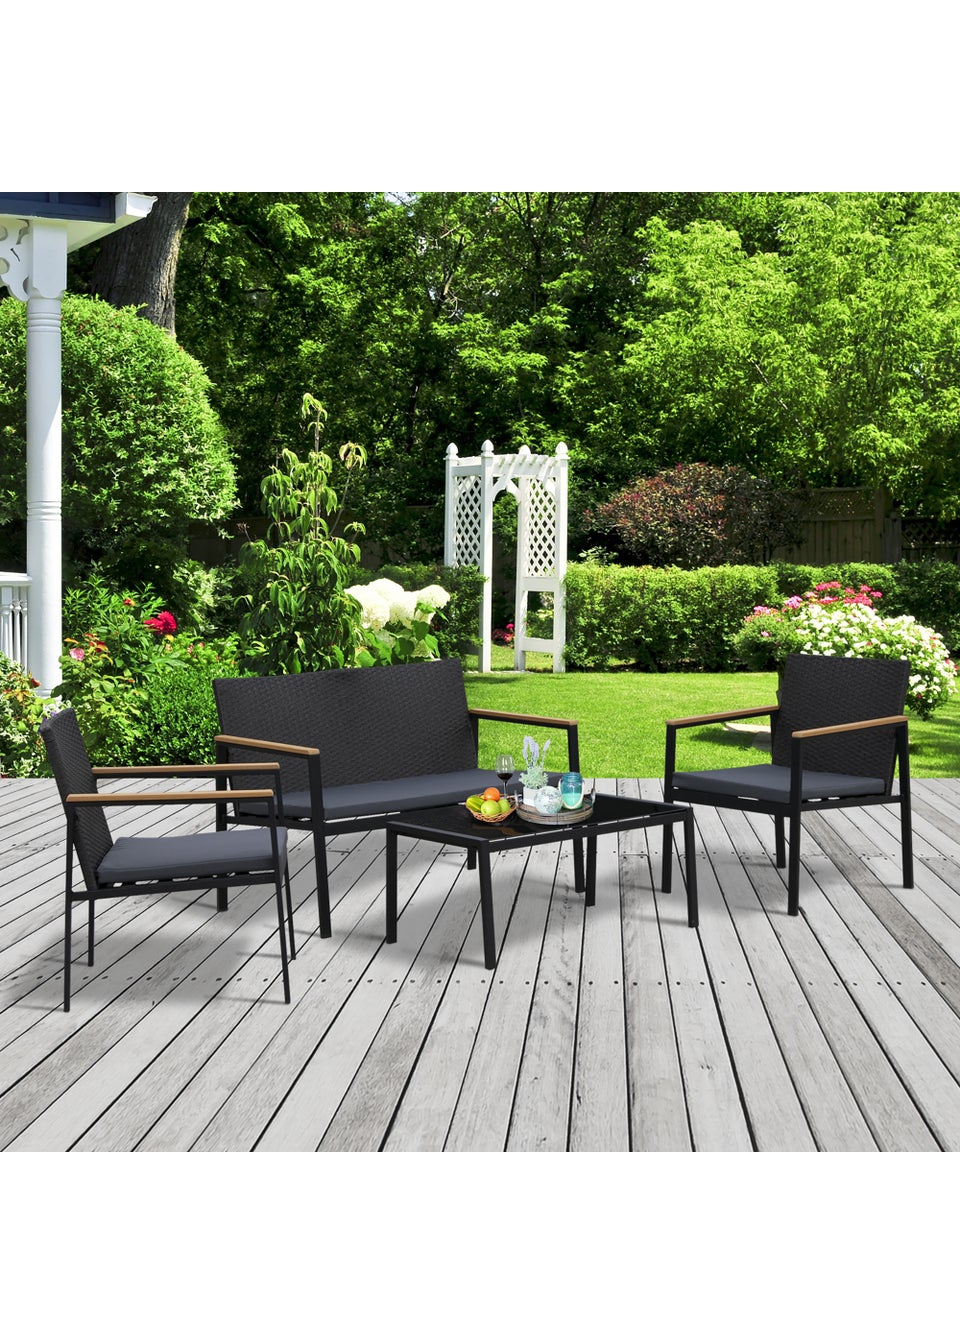 Outsunny 4 Piece Cushioned Outdoor Rattan Wicker Set